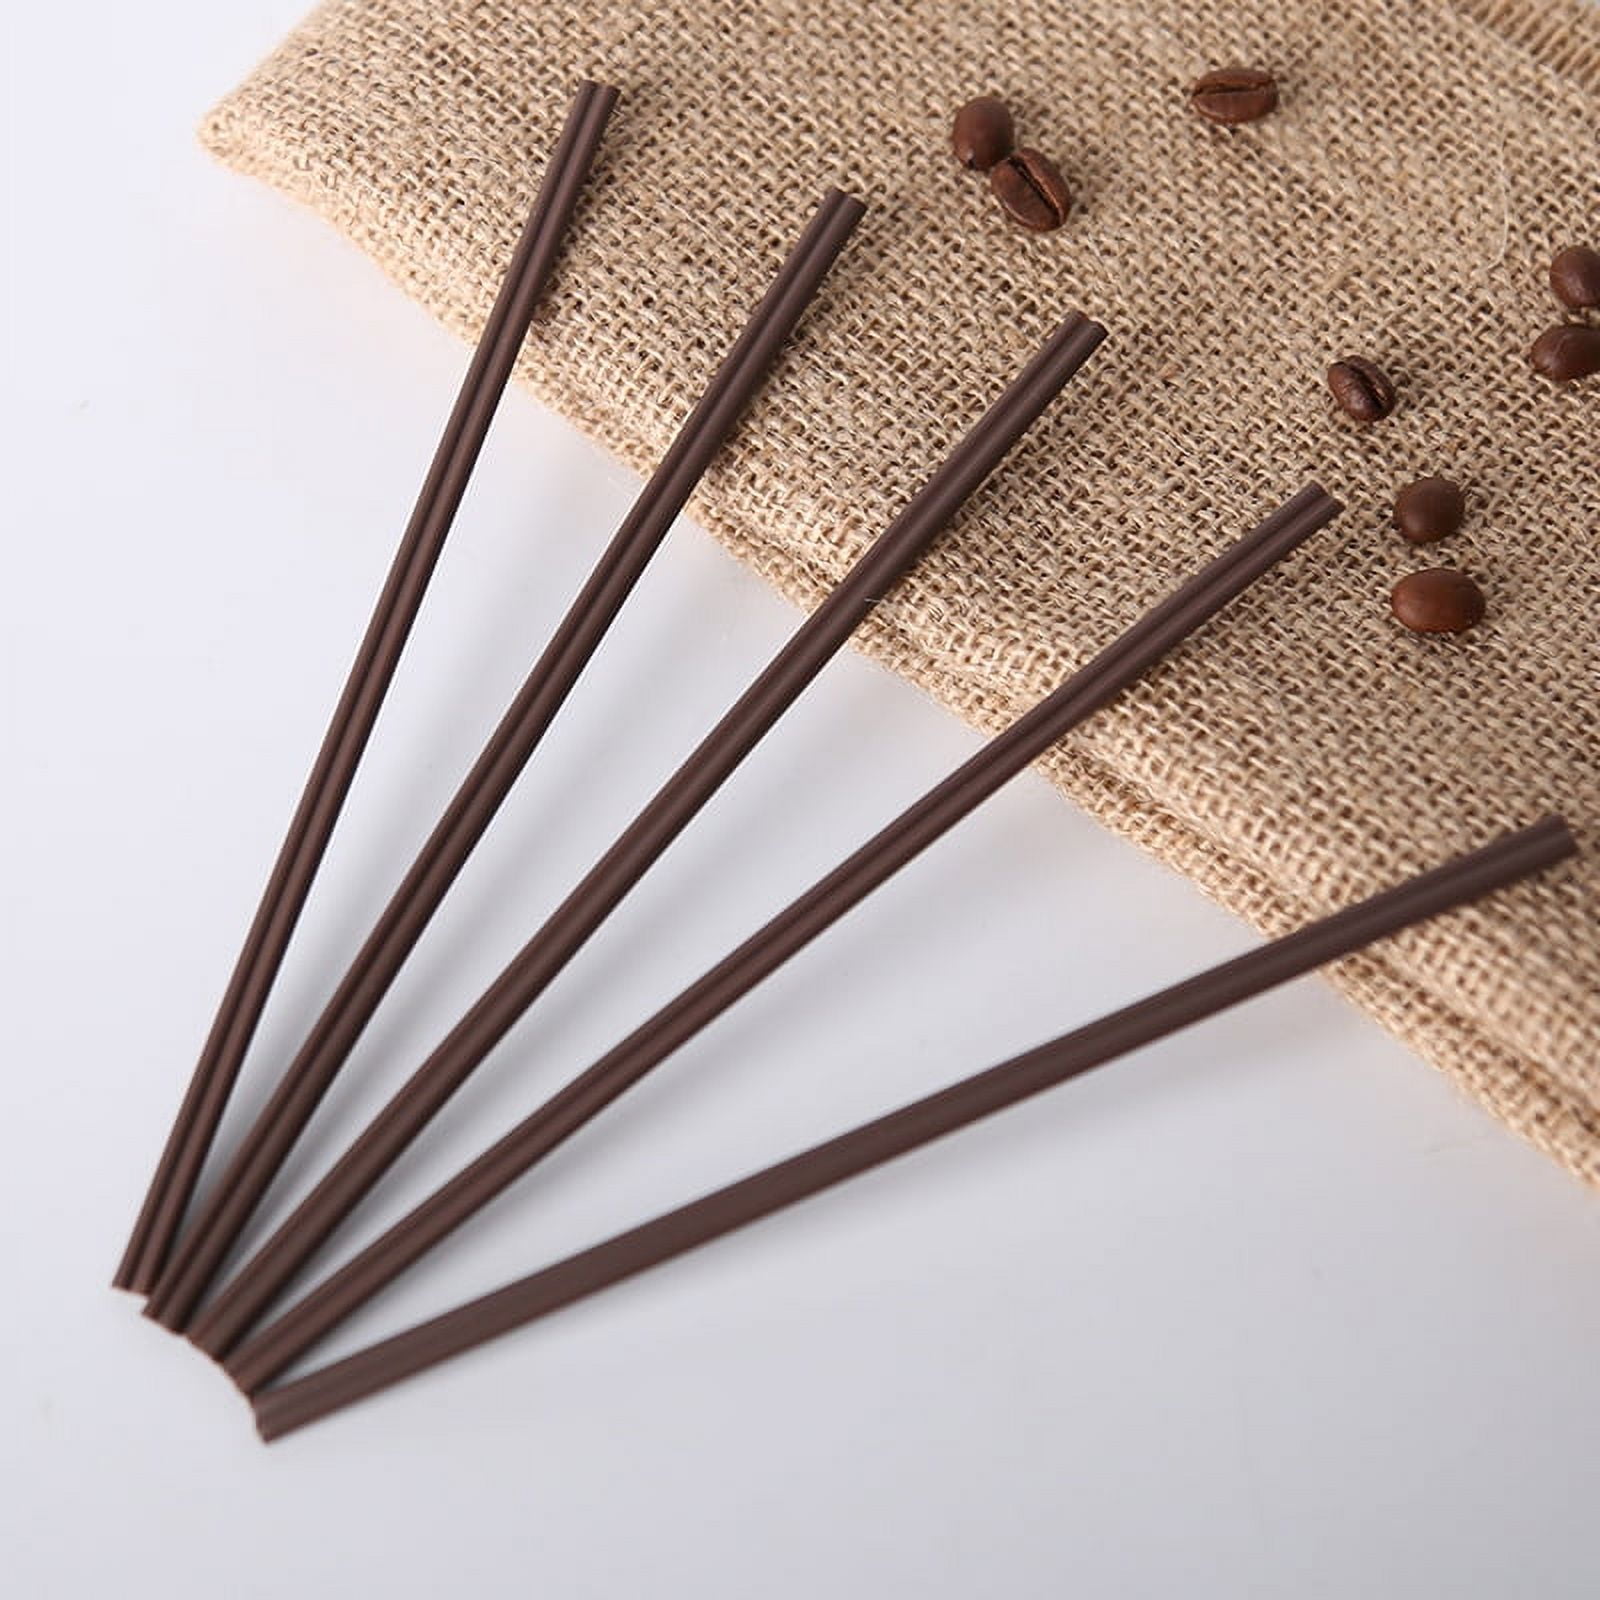 iF Design - SOILABLE Paper Coffee Stirrer-Straw